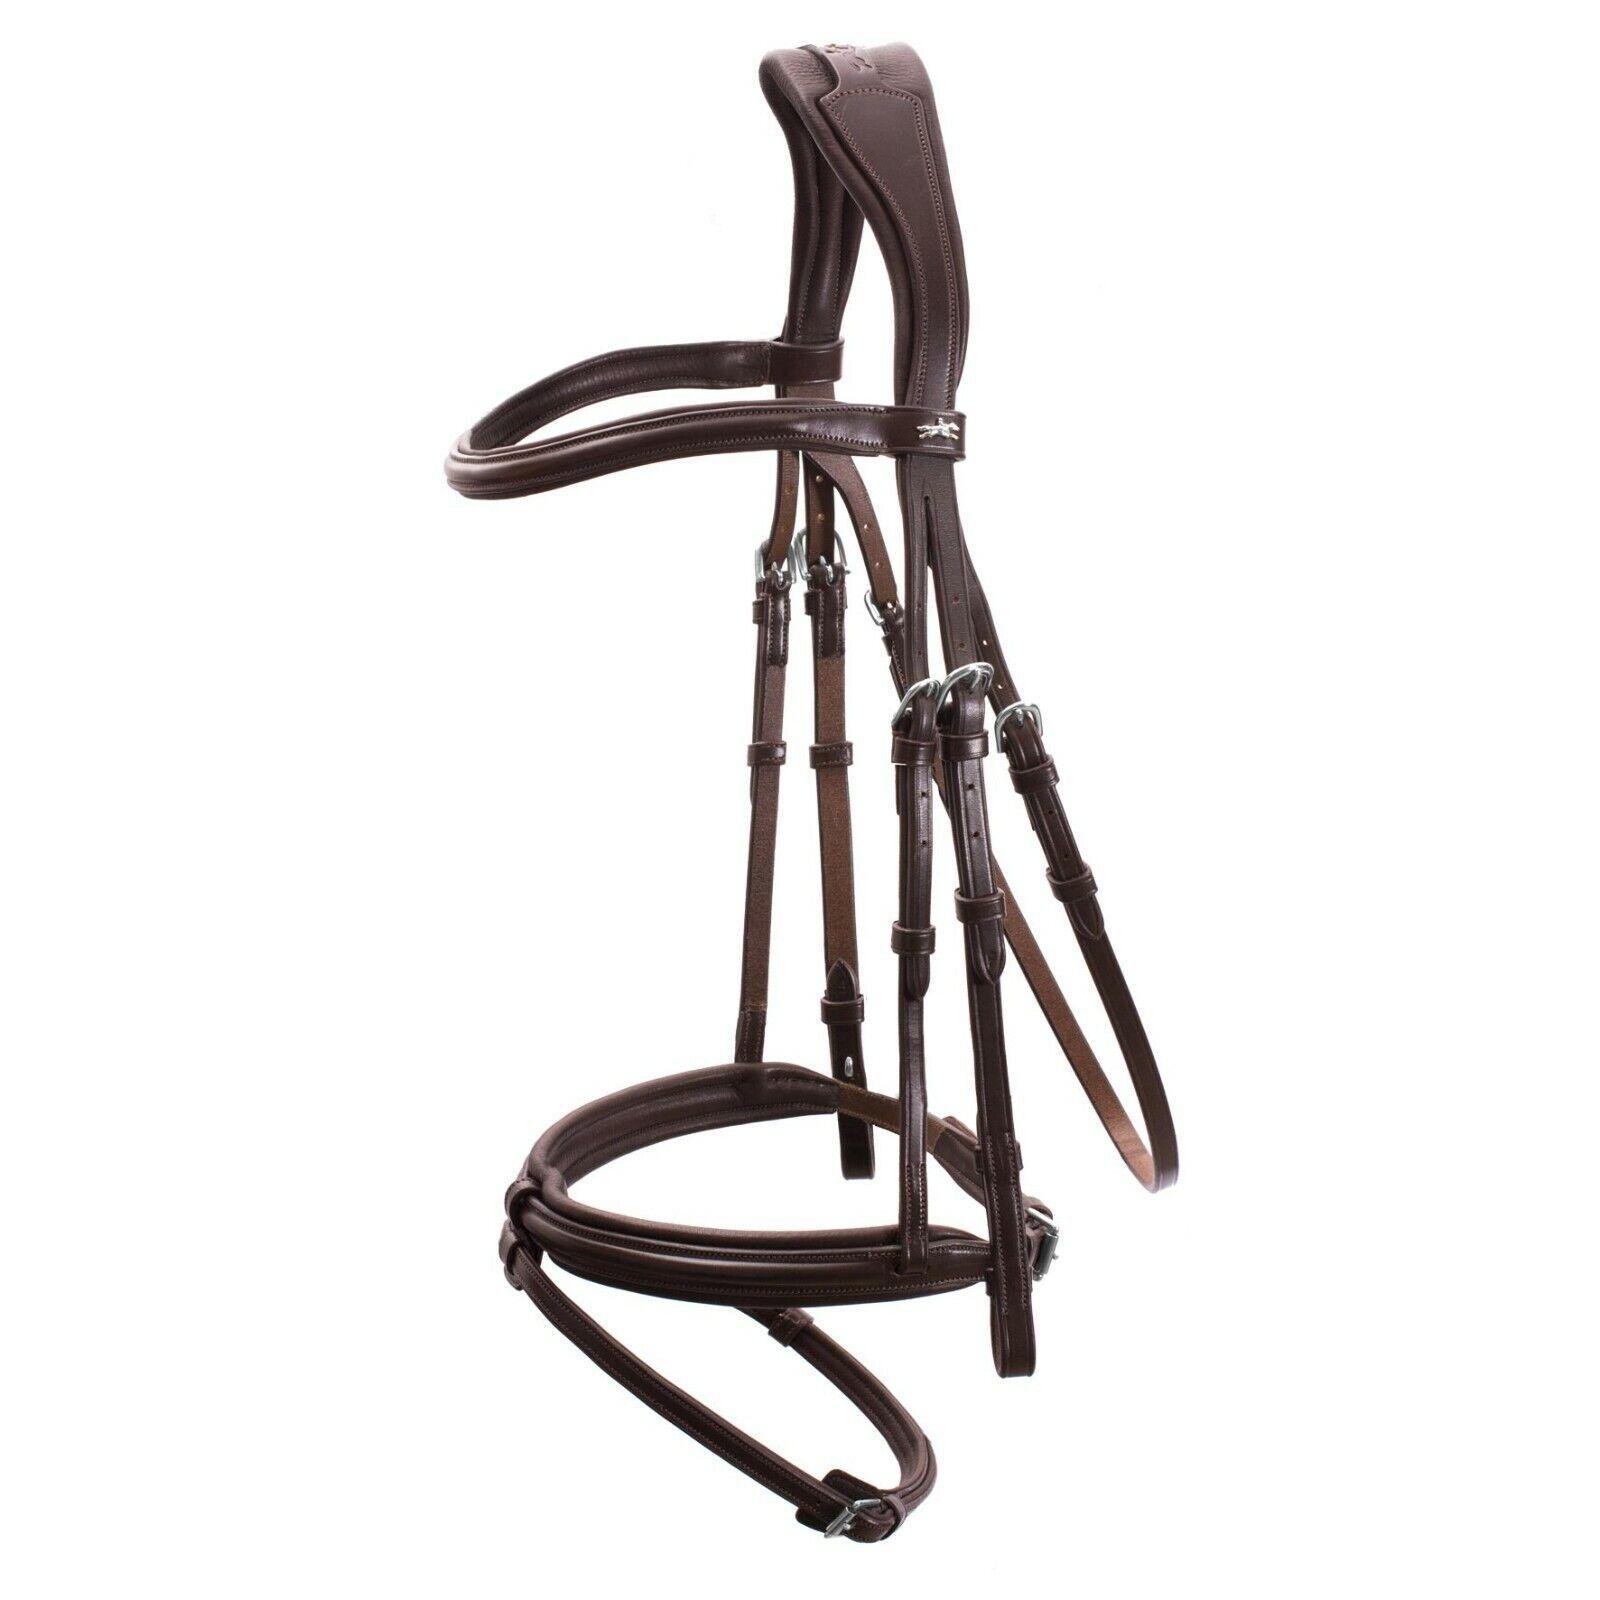 Schockemohle Tokyo Anatomical Bridle - Full Size - Removable Flash